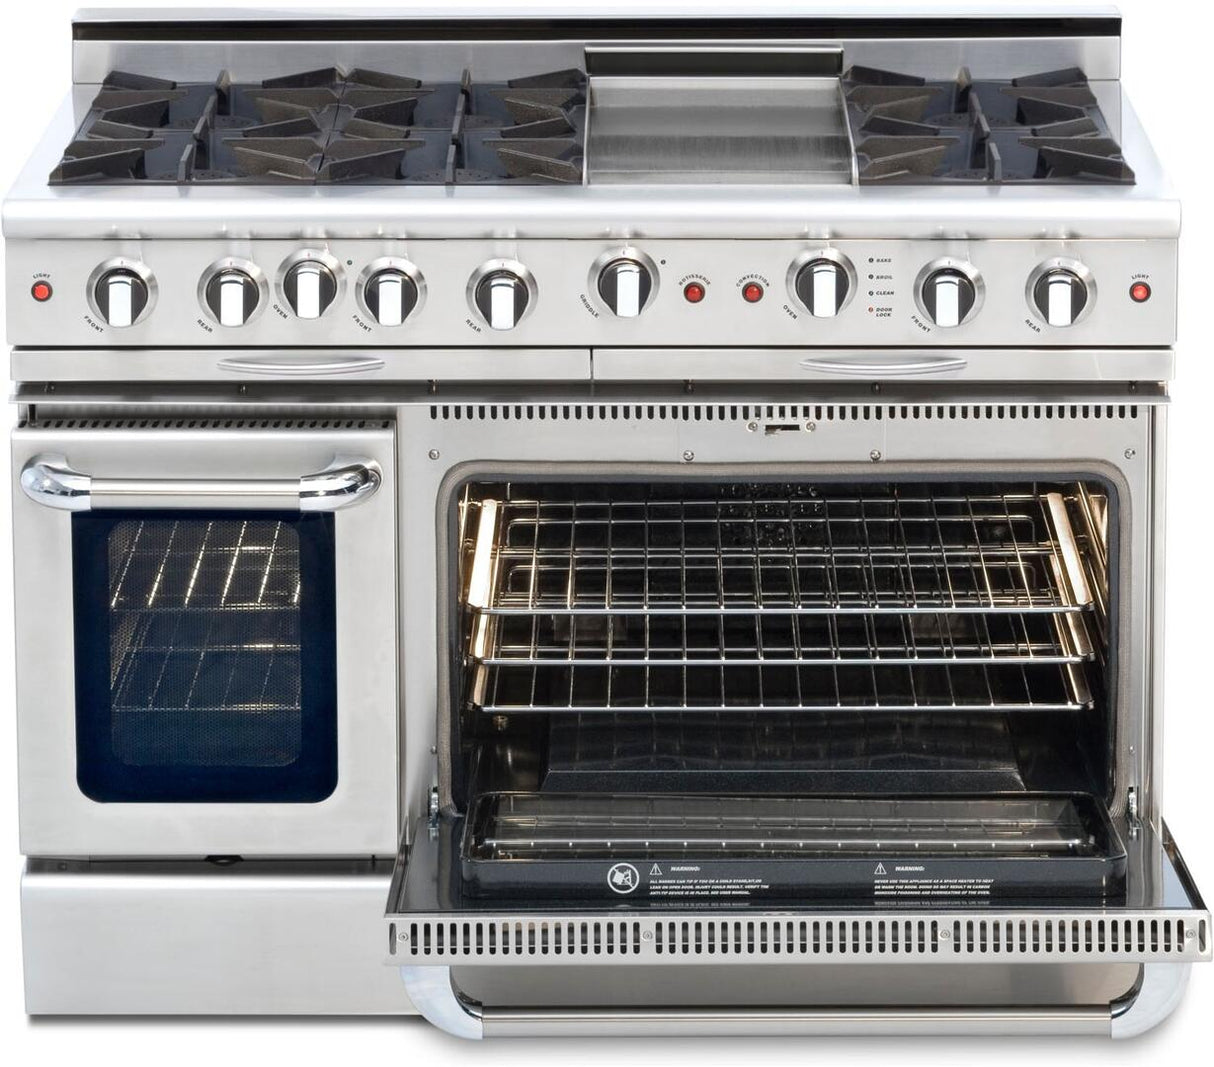 Capital Culinarian Series 48" Freestanding All Gas Range with Self-Cleaning Double Oven in Stainless Steel (CGSR488)